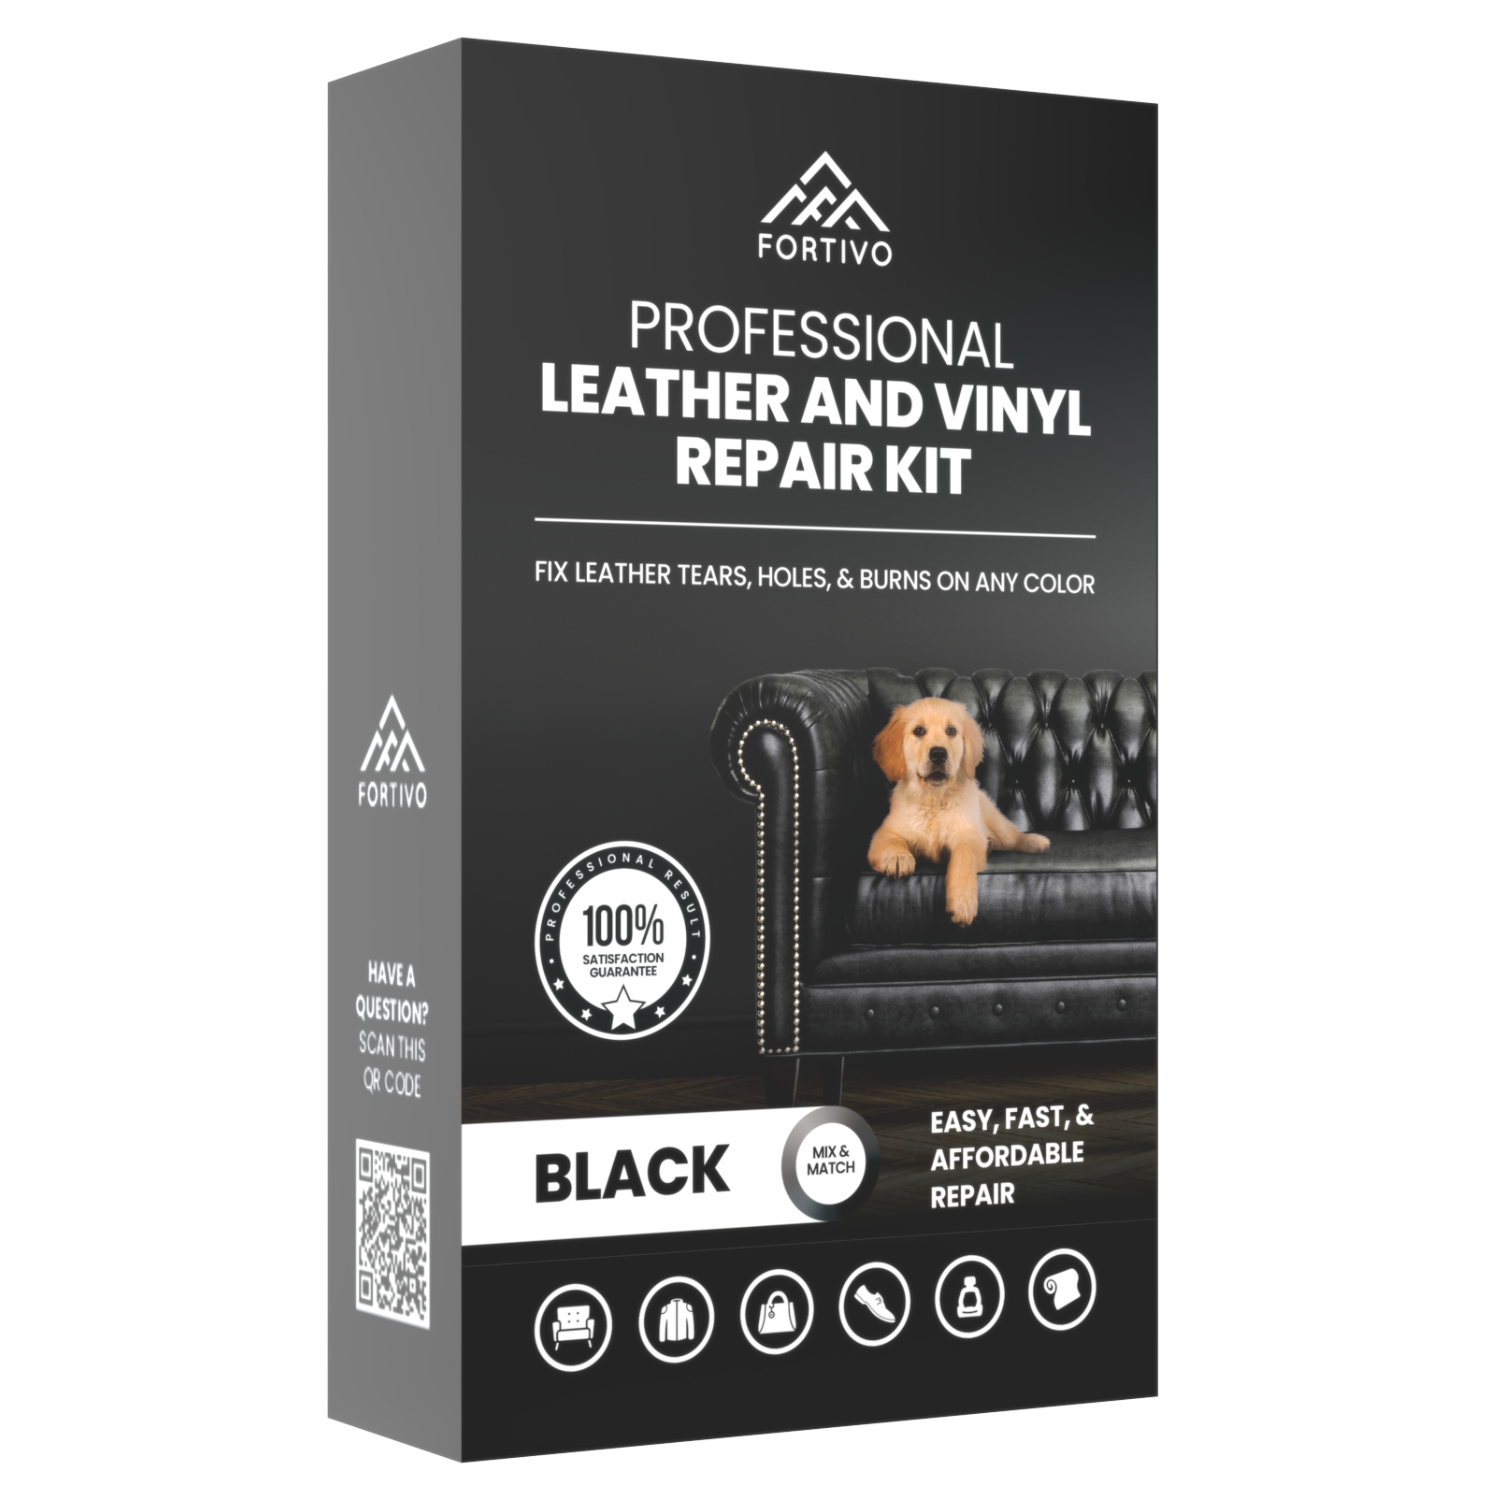 FORTIVO Black Leather Leather Repair Kit for Furniture, Leather